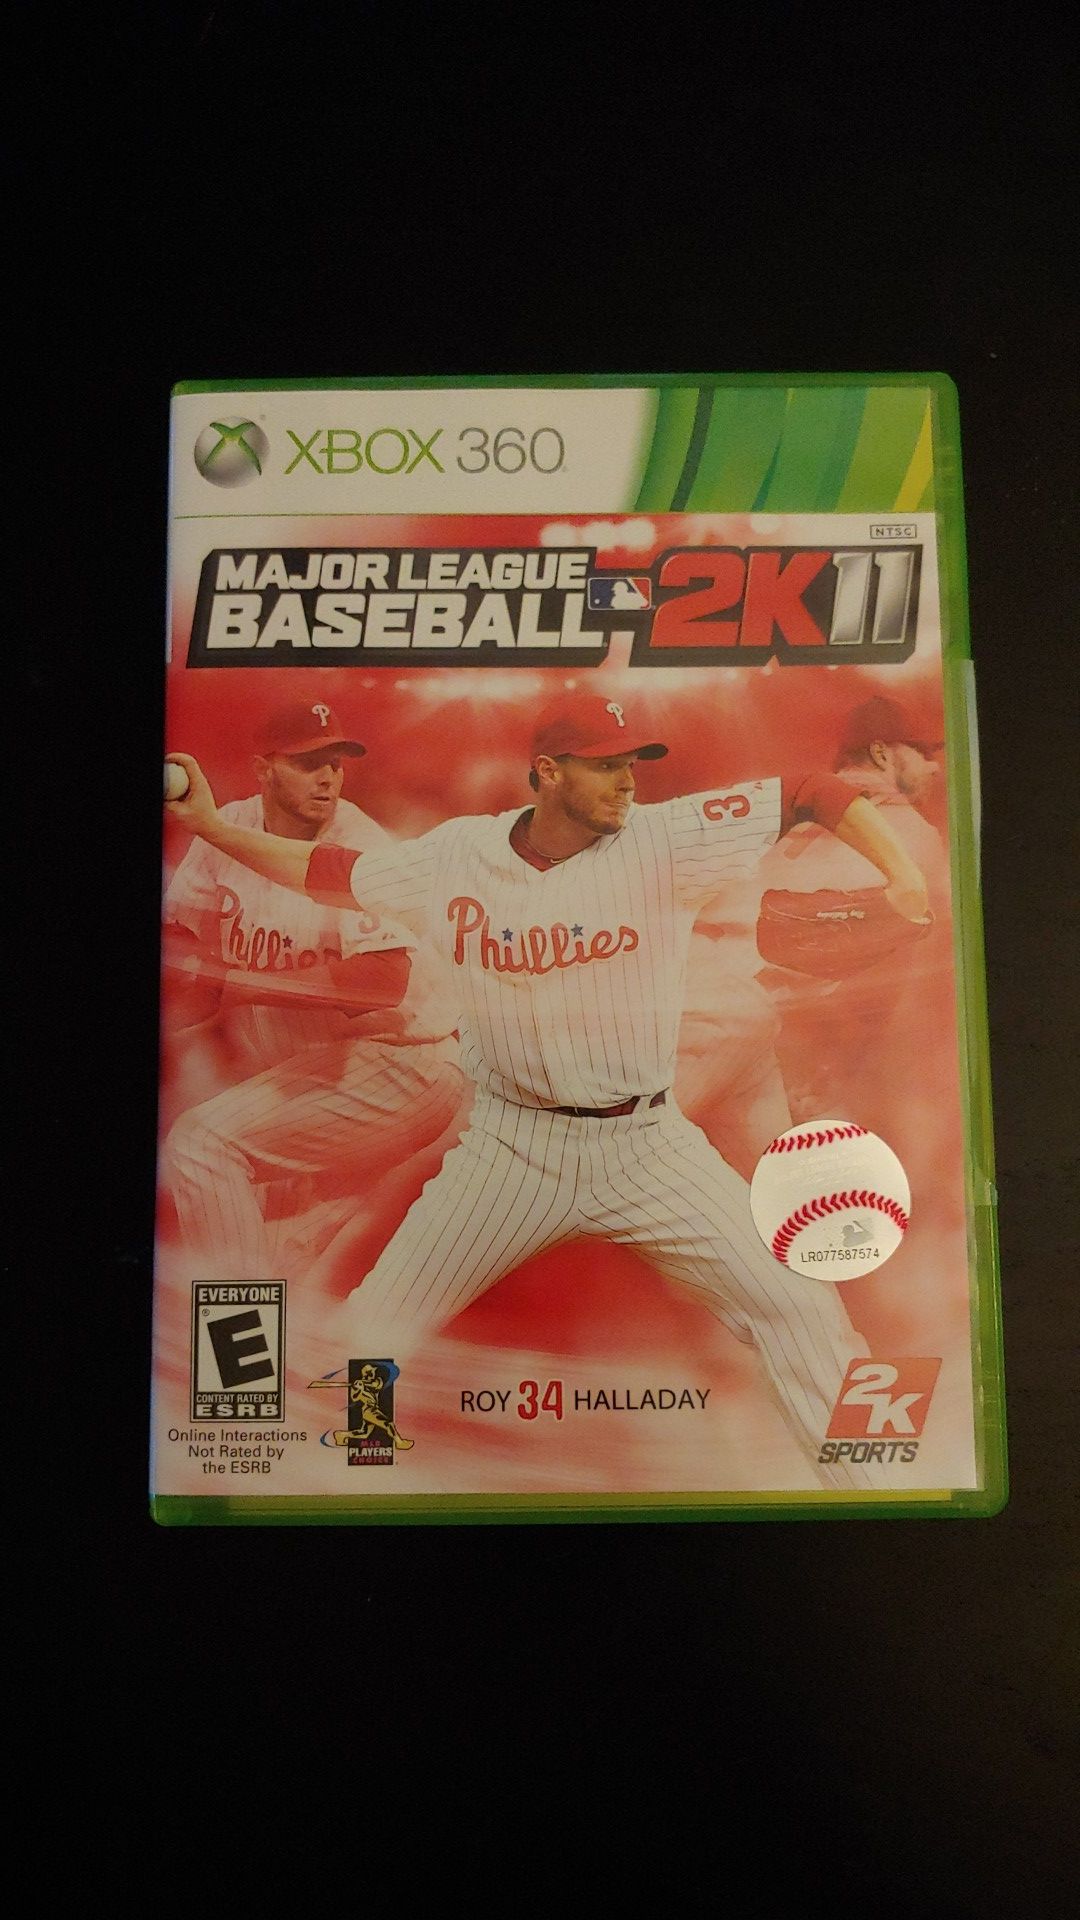 XBOX 360 Major League Baseball 2K11 Game Complete Working